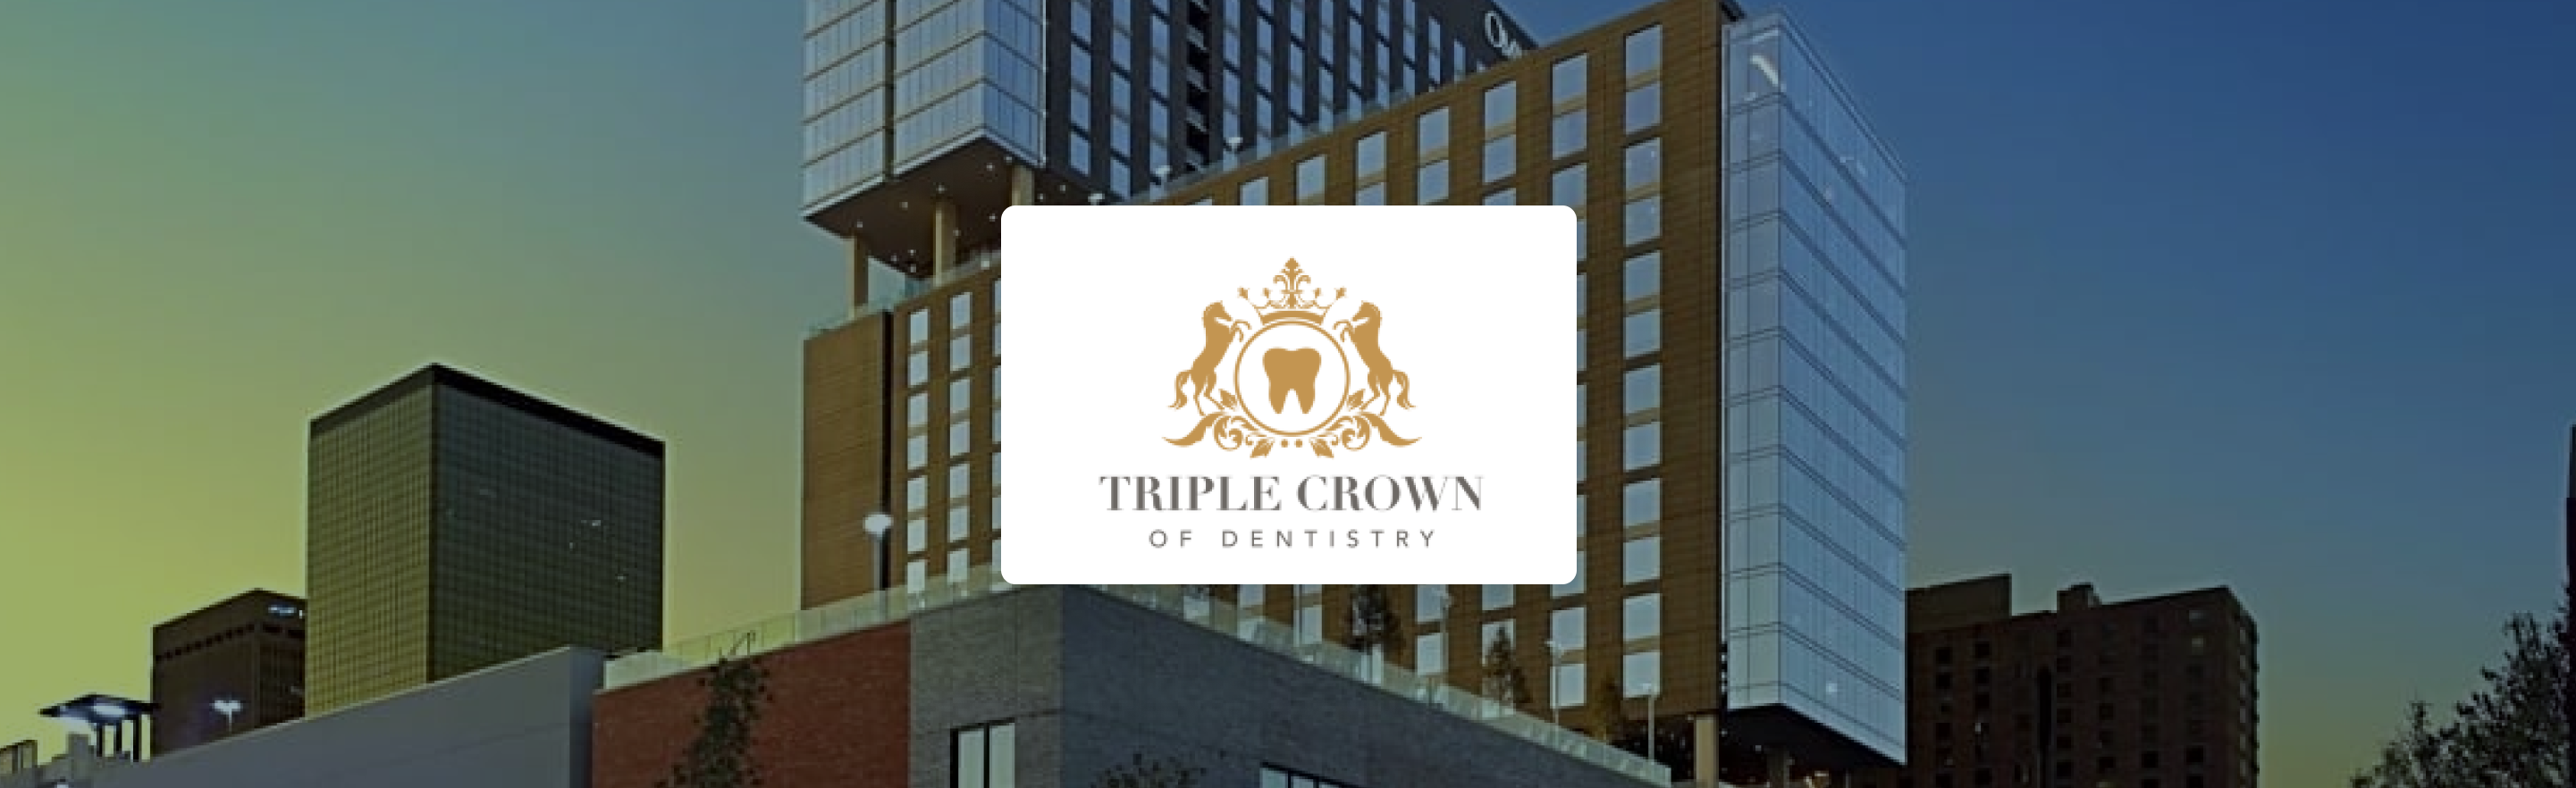 the triple crown of dentistry